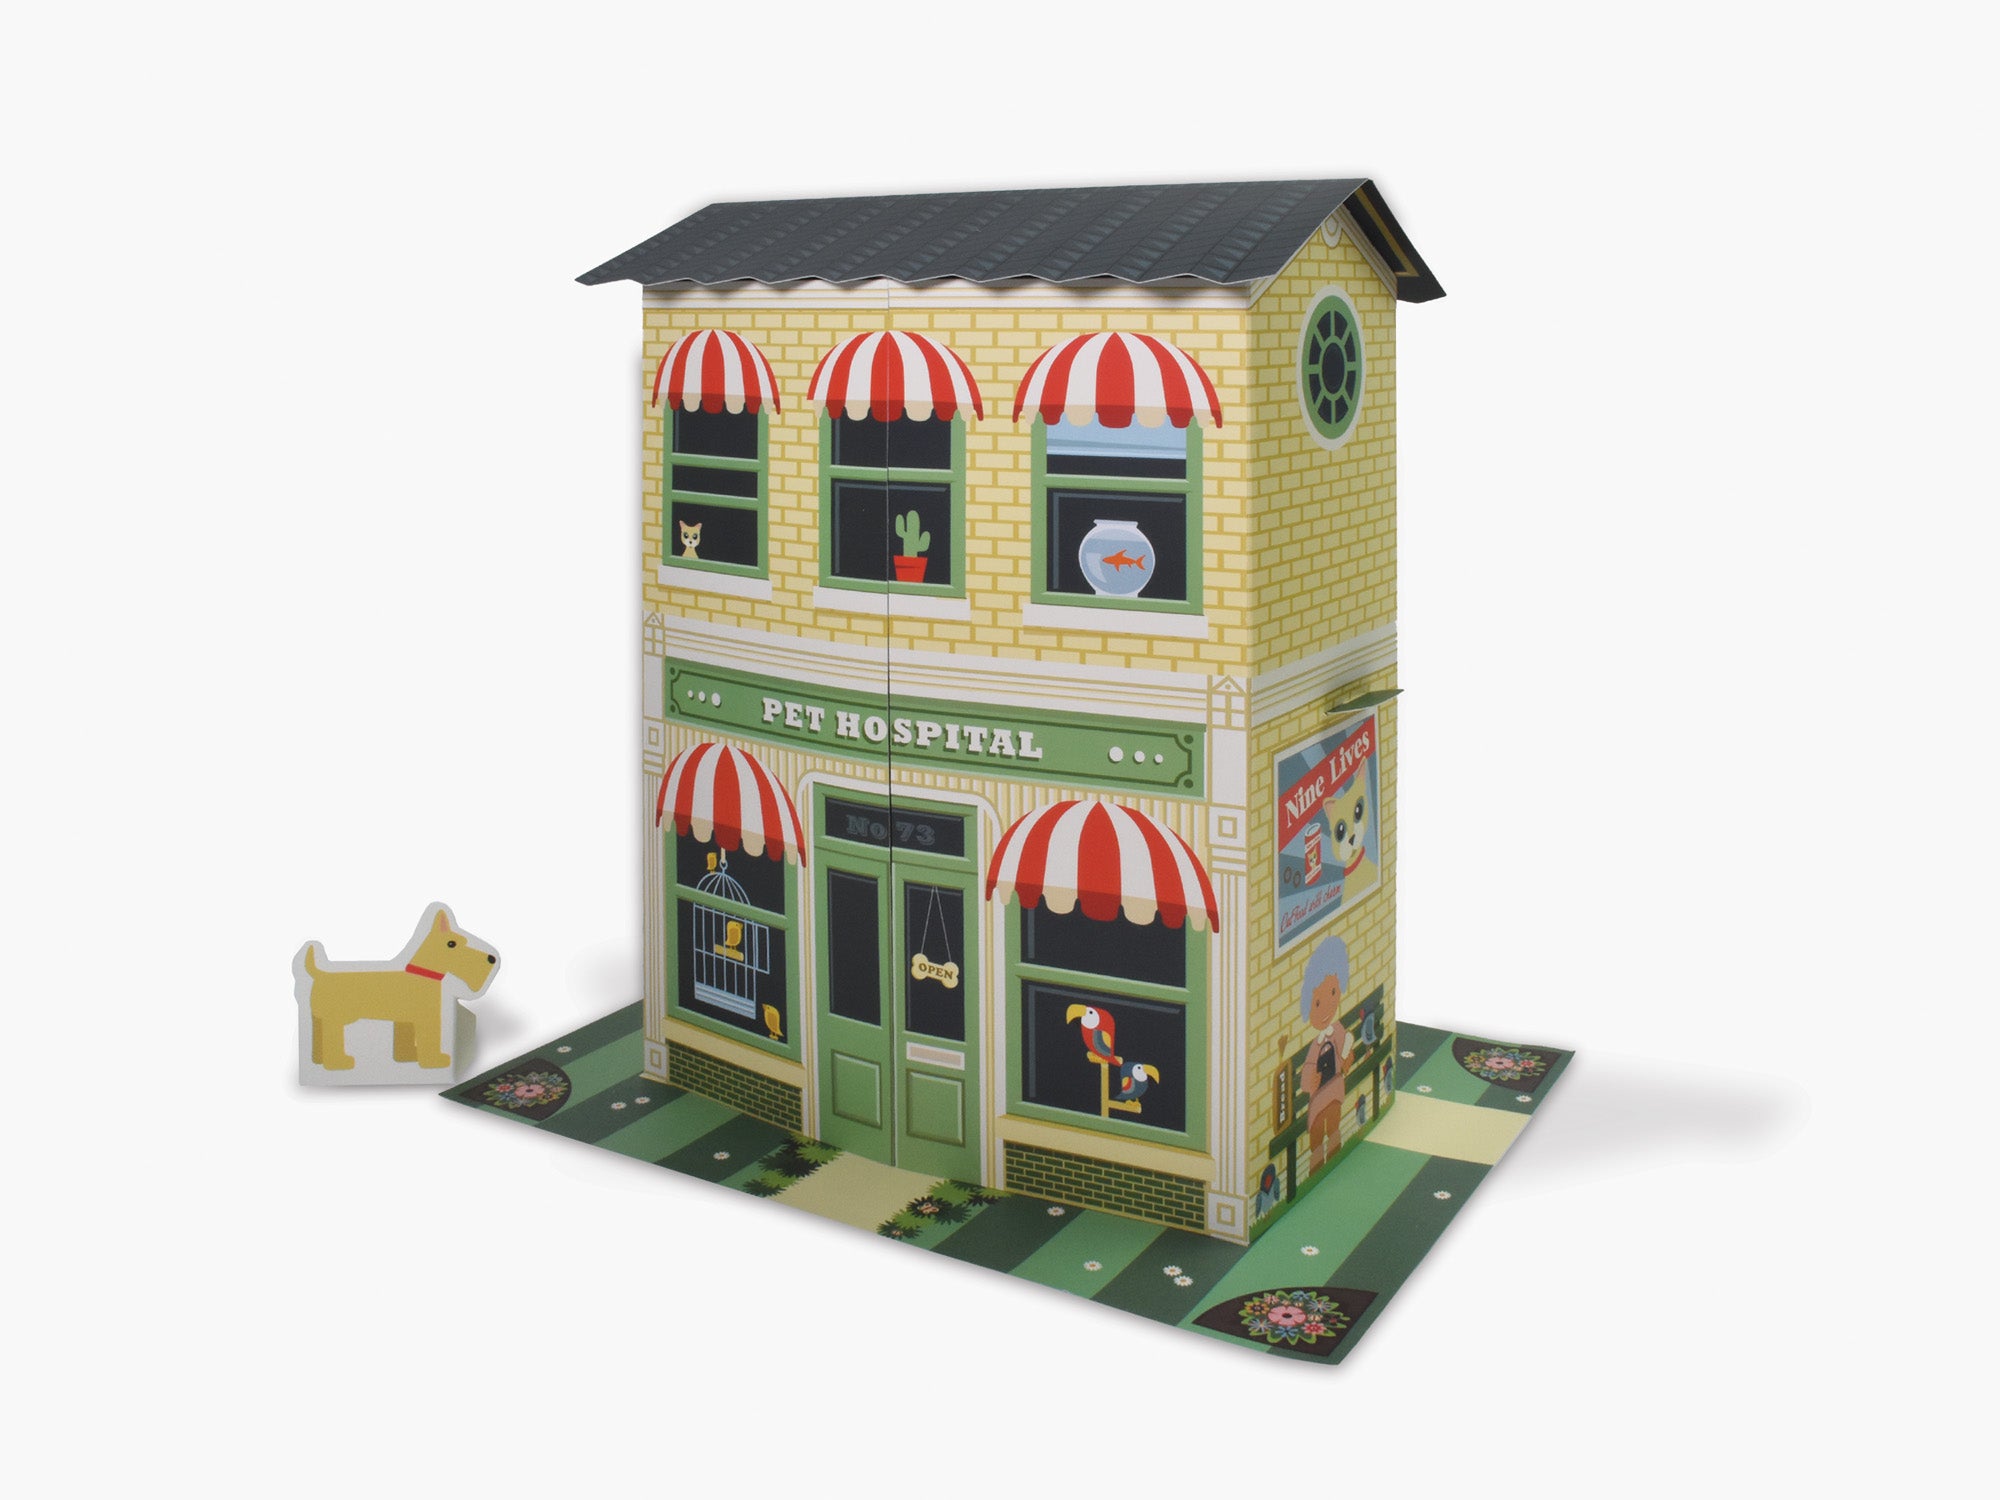 Cardboard pet hospital toy shown fully made up, with cut out dog standing to the side